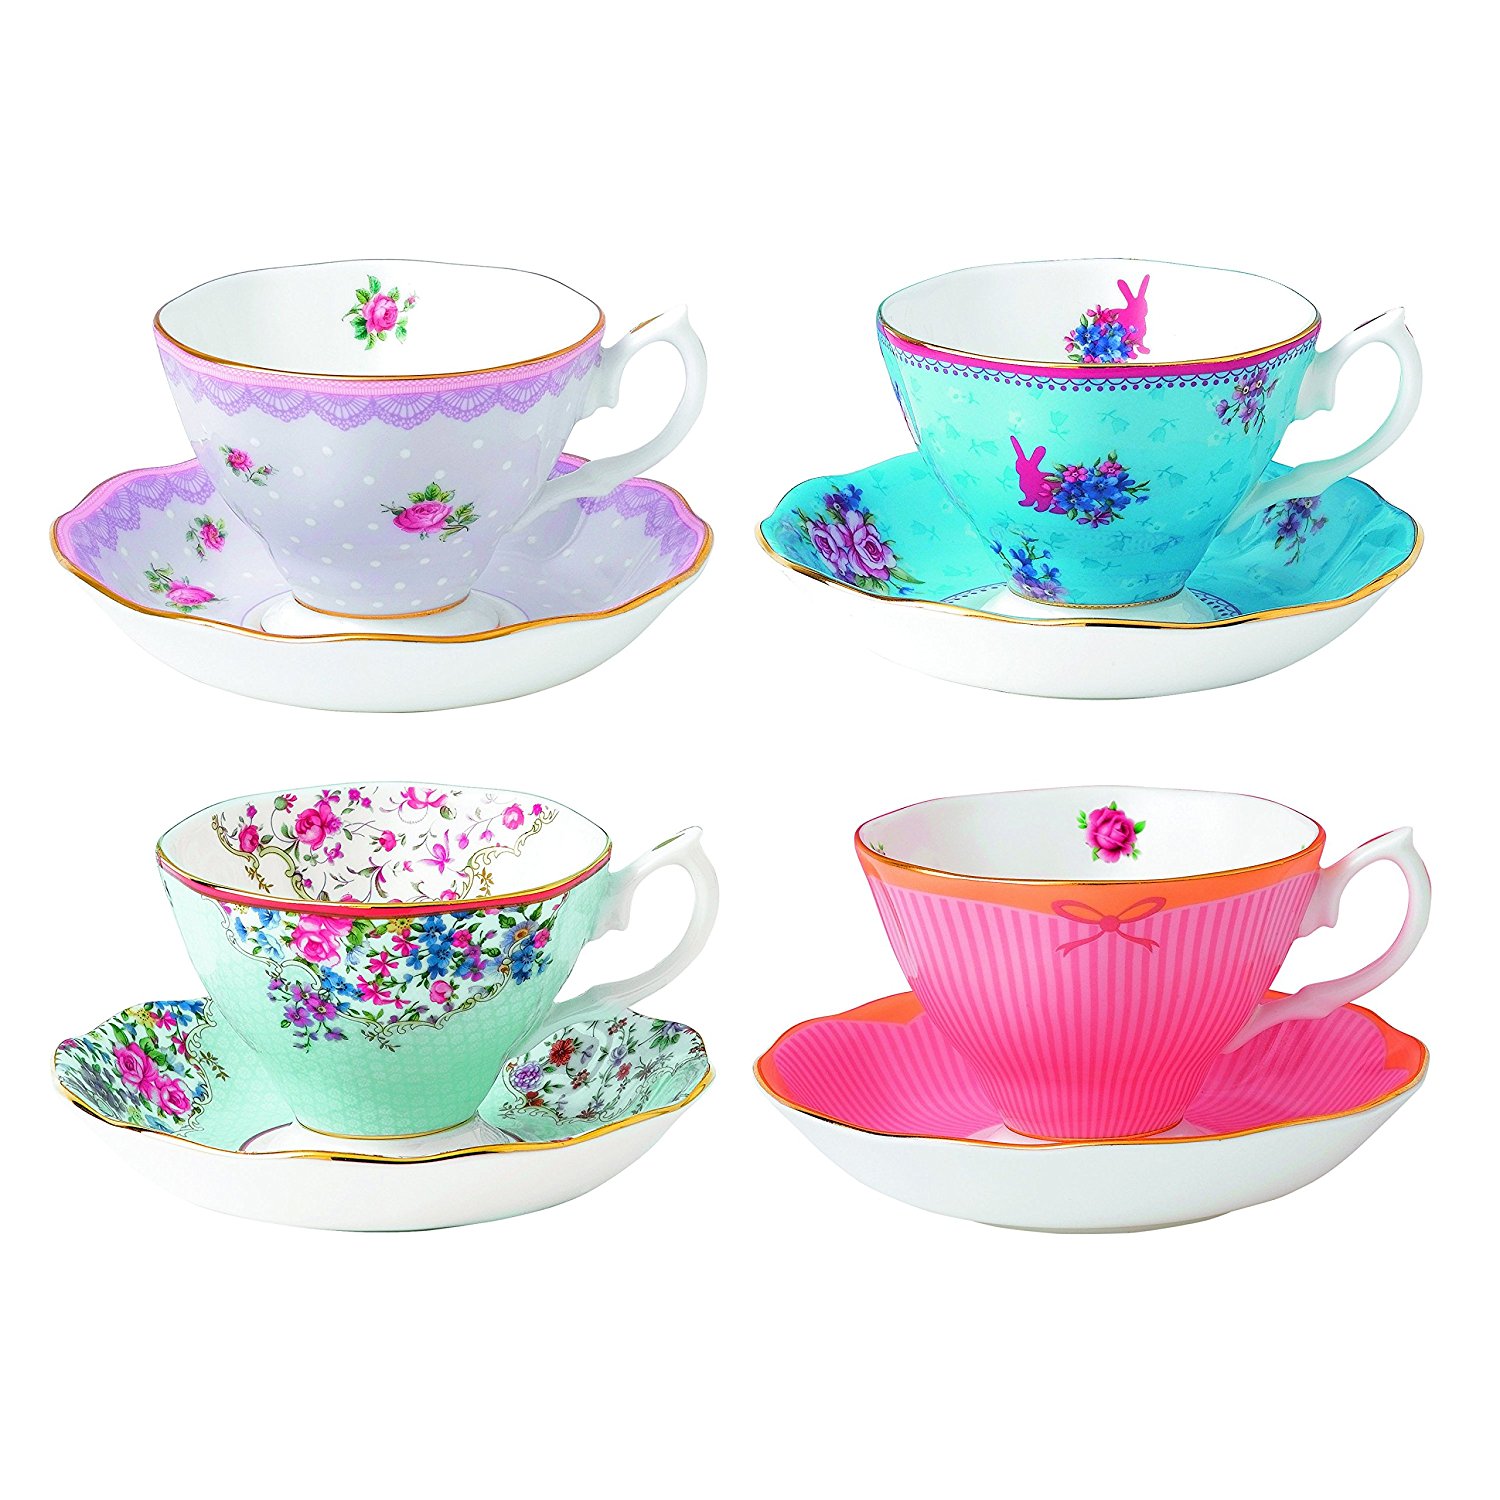 Royal Albert Candy Teacups and Saucers, (Set of 4), Mixed Patterns